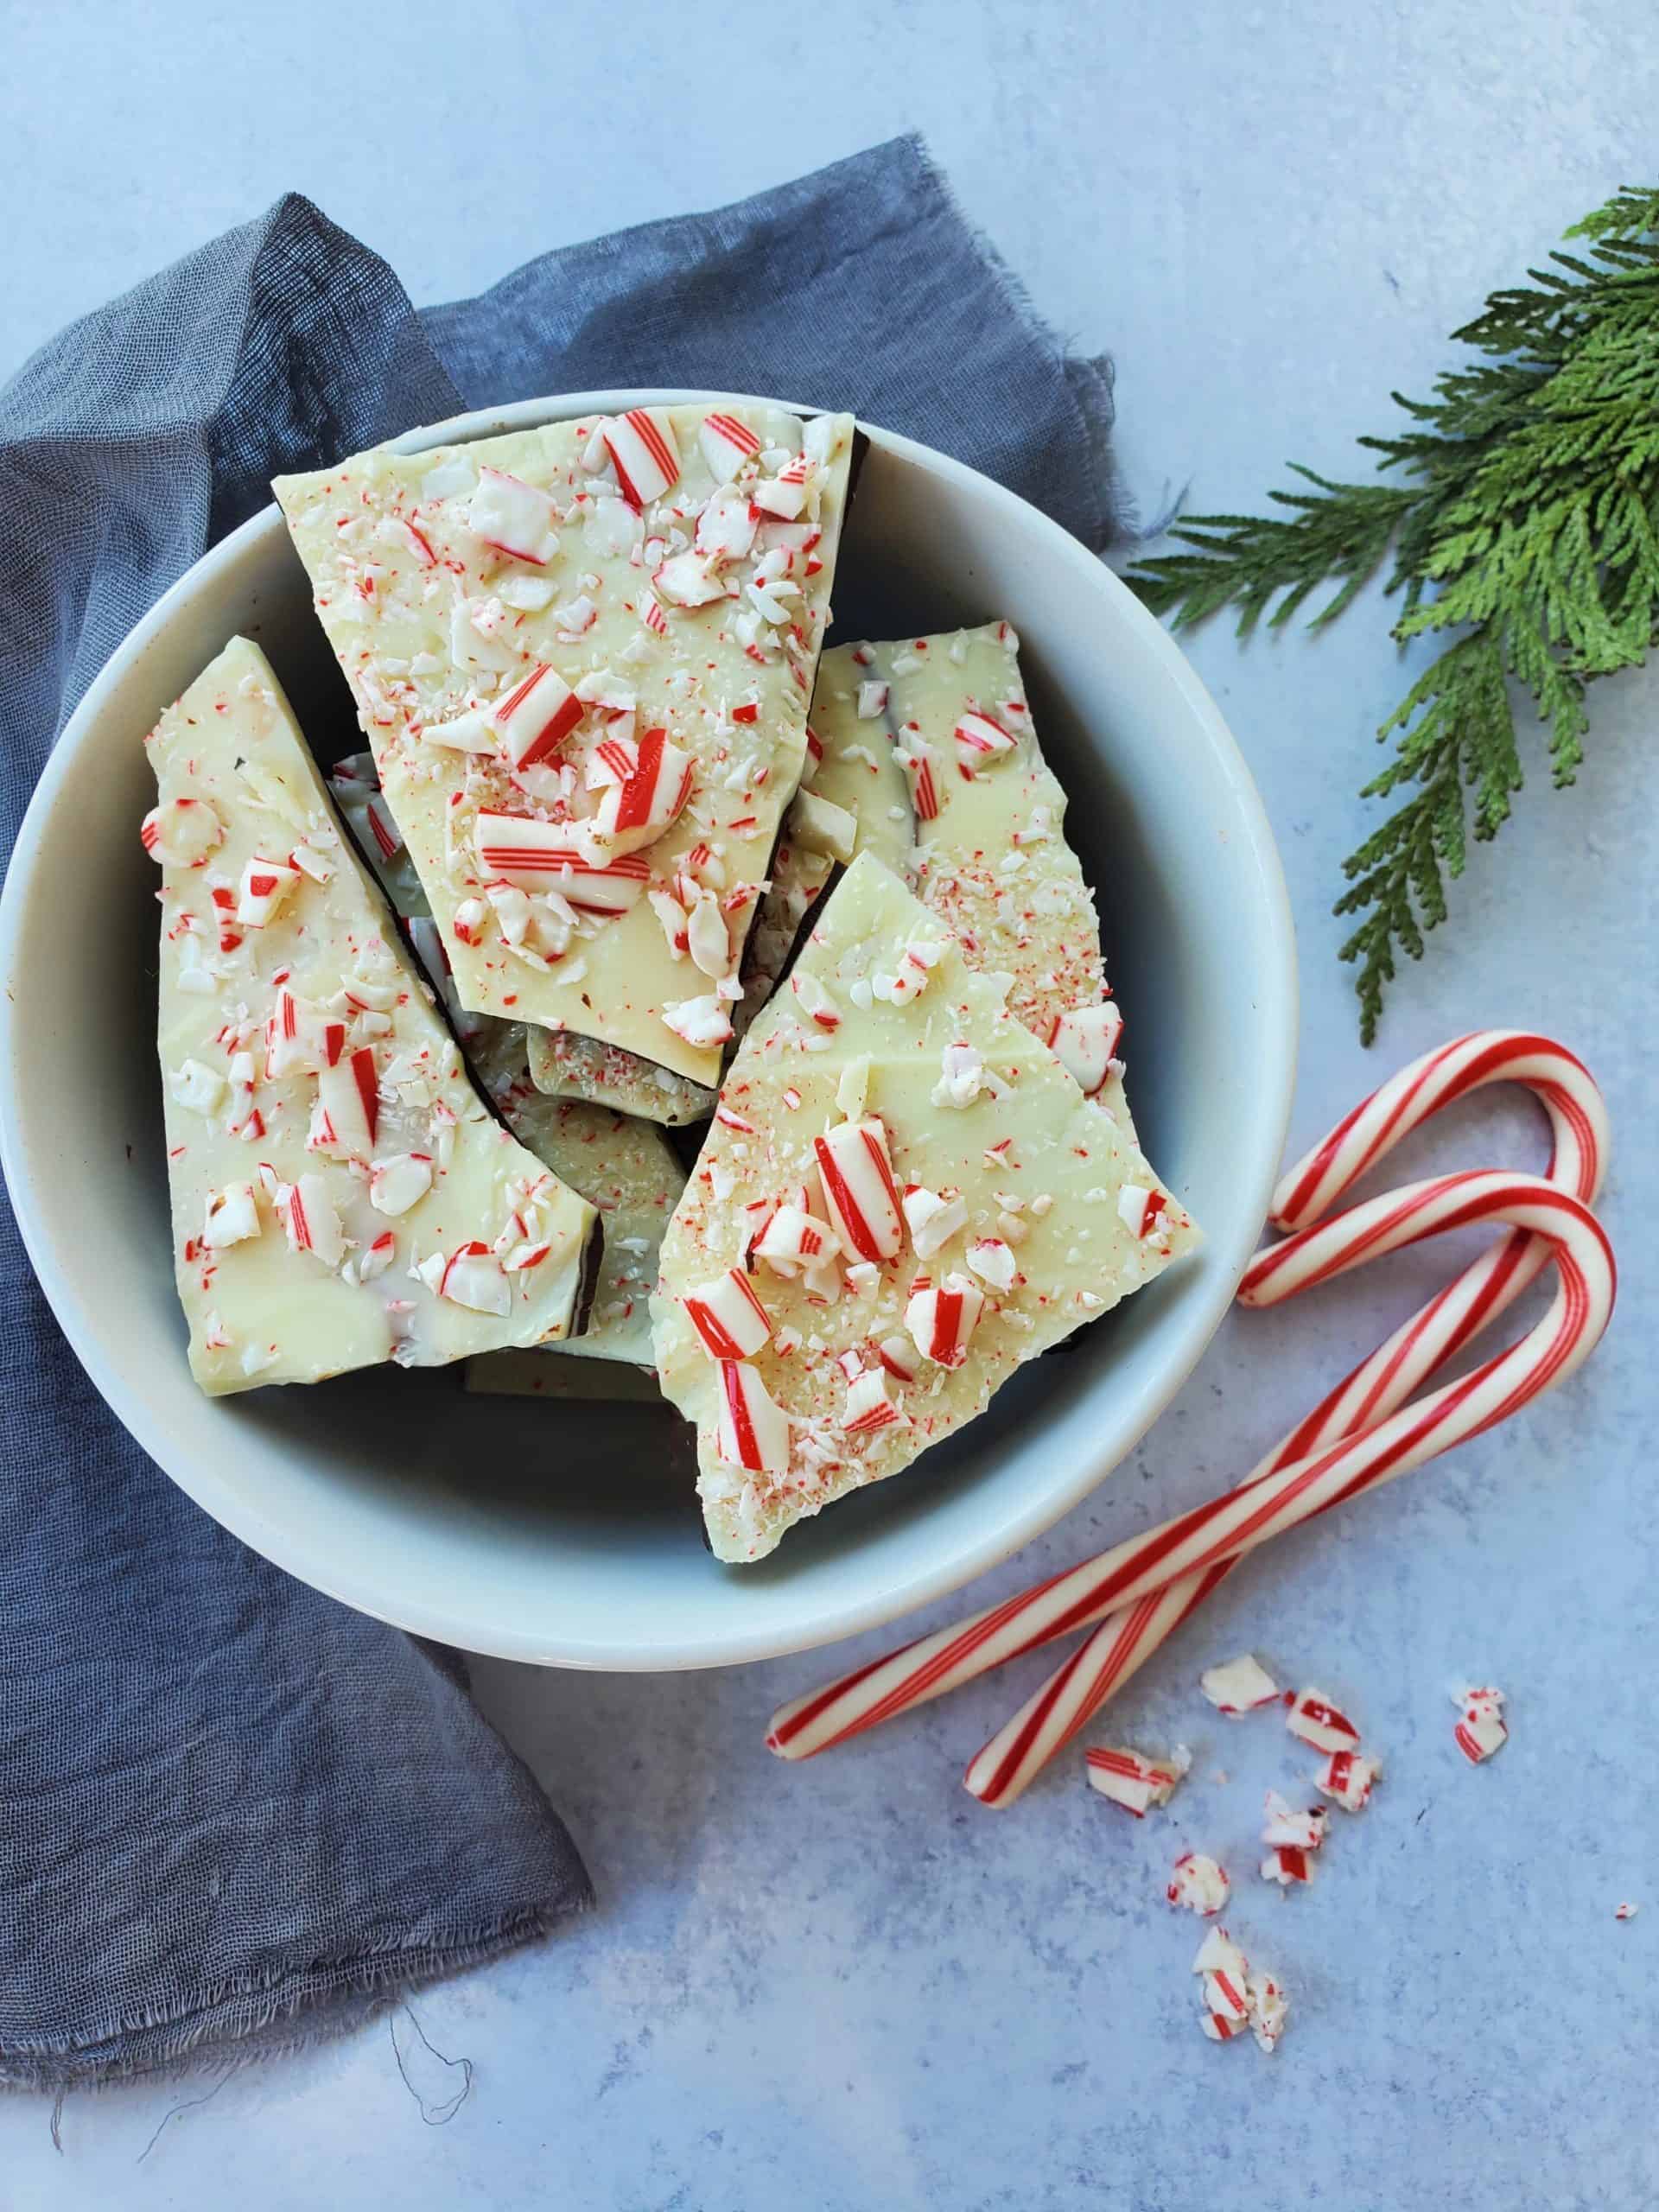 Peppermint Bark broken up in a bowl with candy canes and pine as decoration